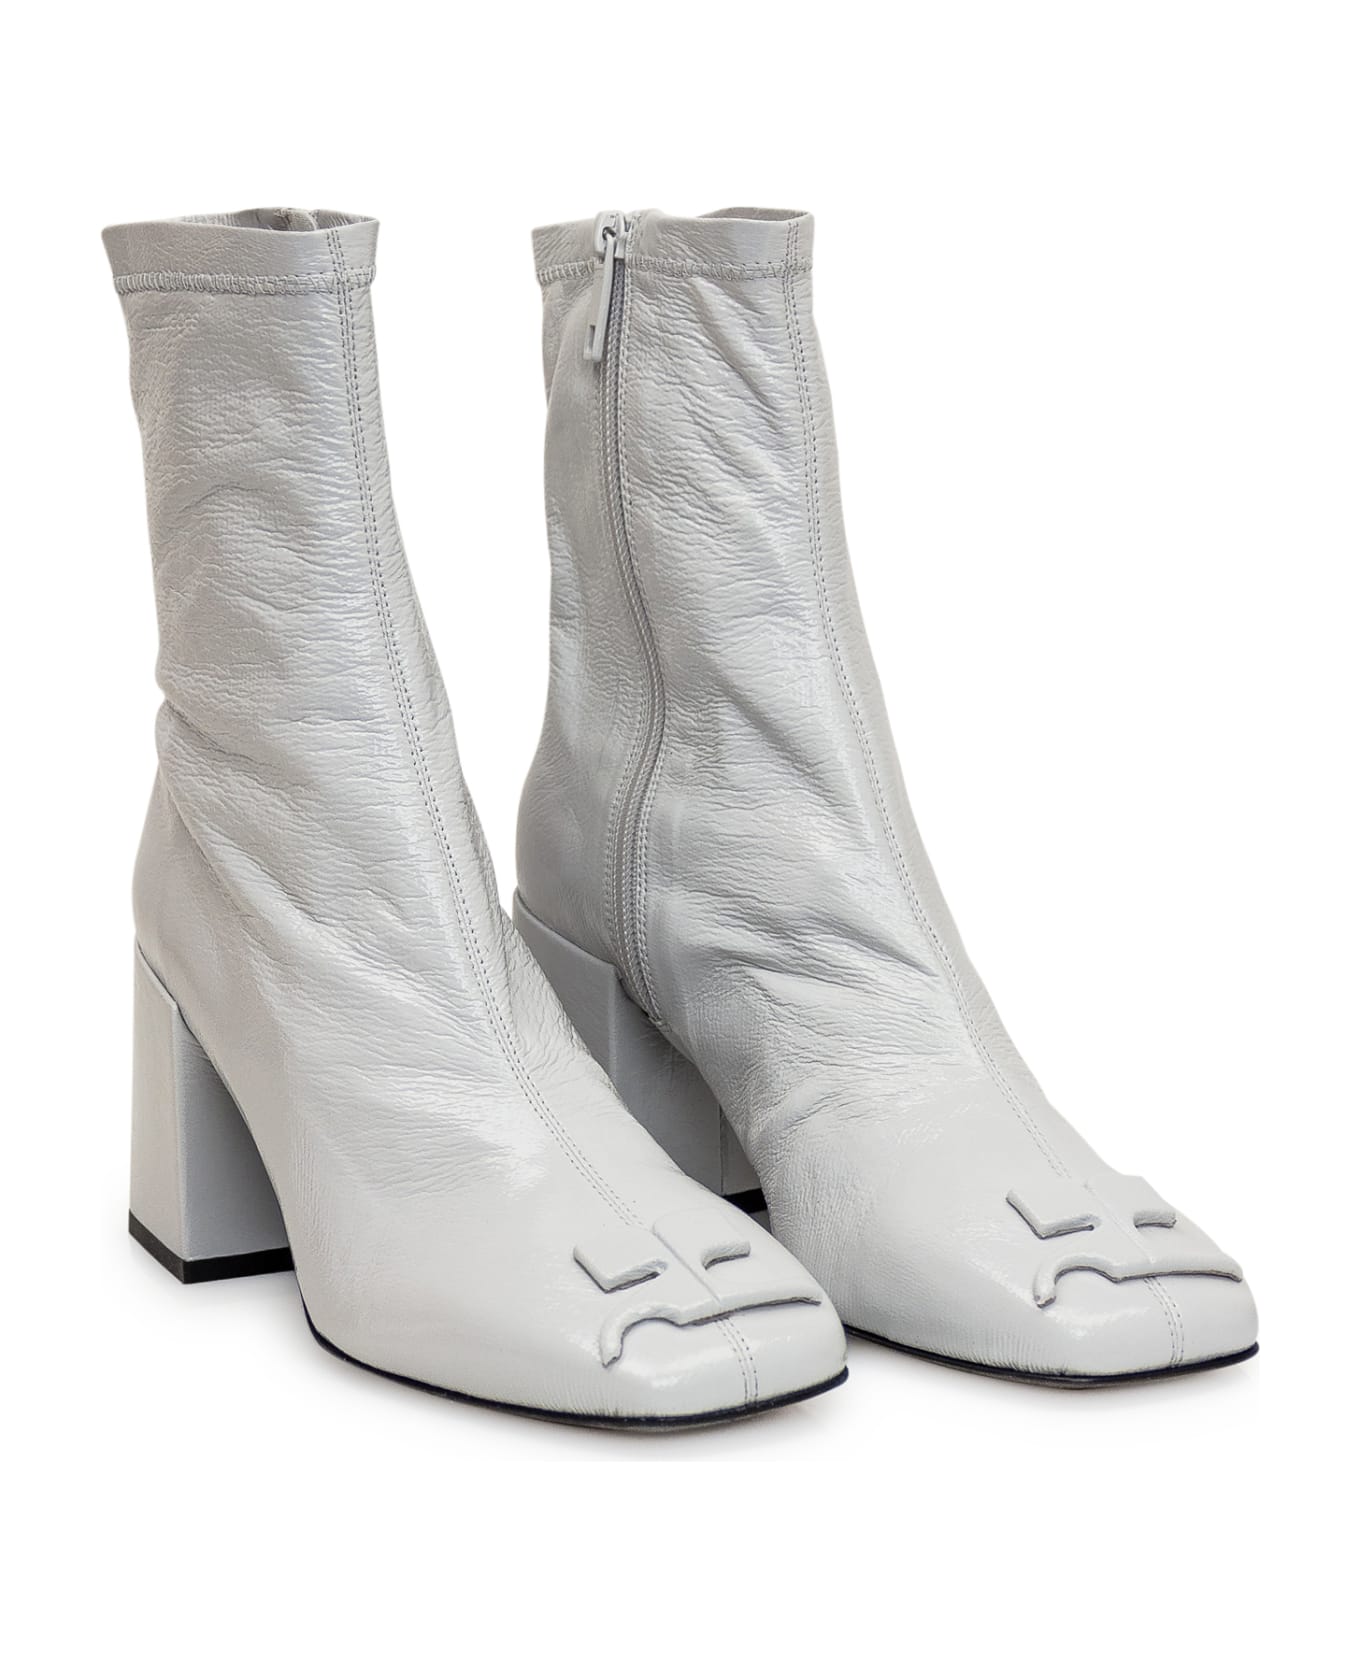 Courrèges Leather Boots - Dirty White ブーツ